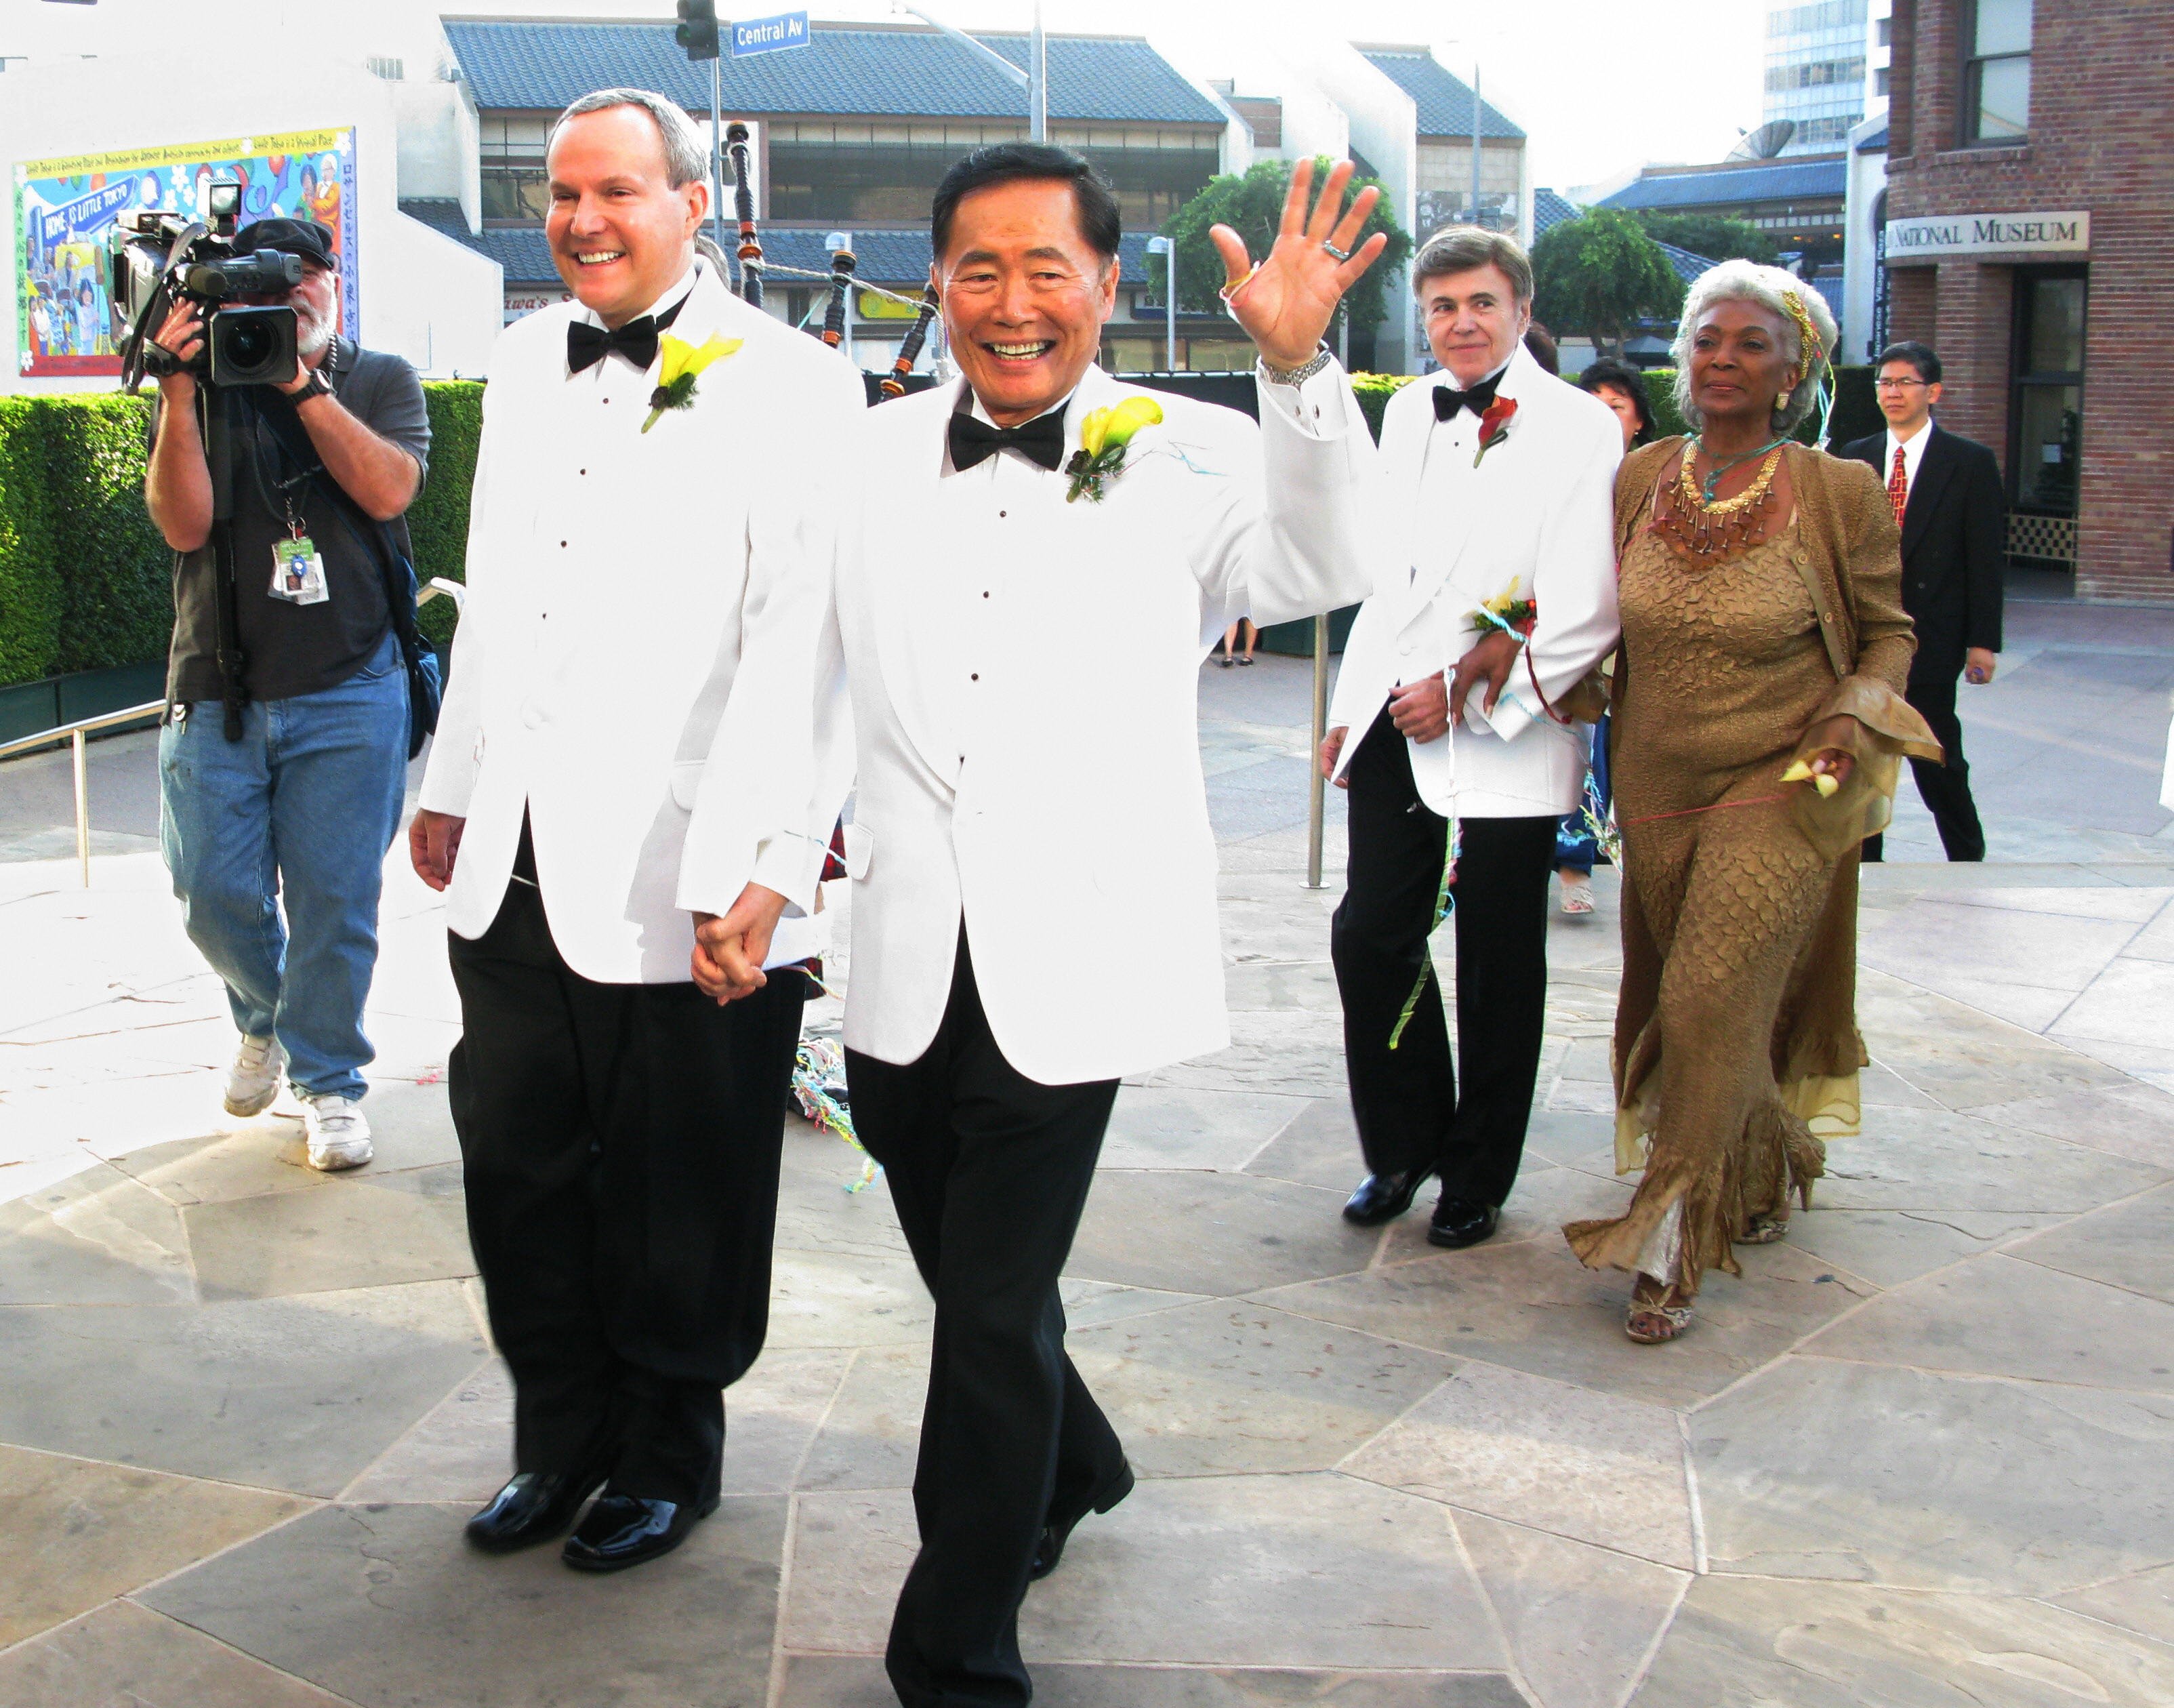 George Takei and Brad Altman with Walter Koenig and Nichelle Nichols at their wedding at the Japanese American National Museum on September 14, 2008 | Source: Getty Images